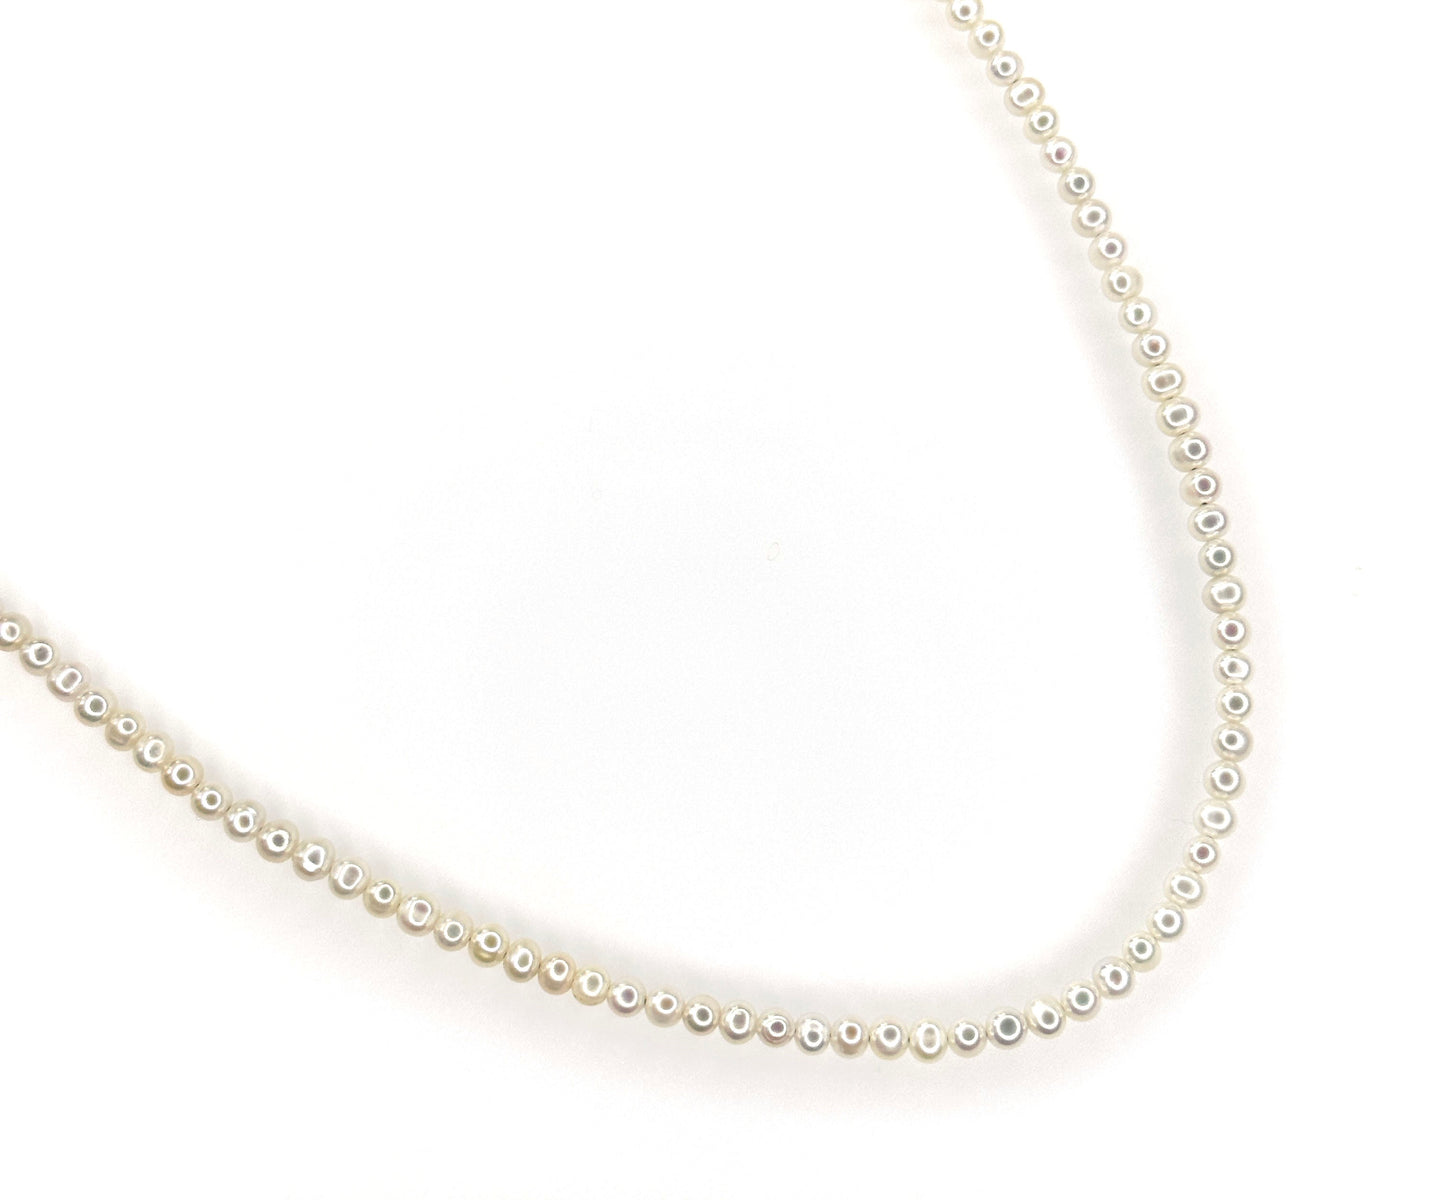 Caviar pearls (freshwater pearl necklaces, bracelets)